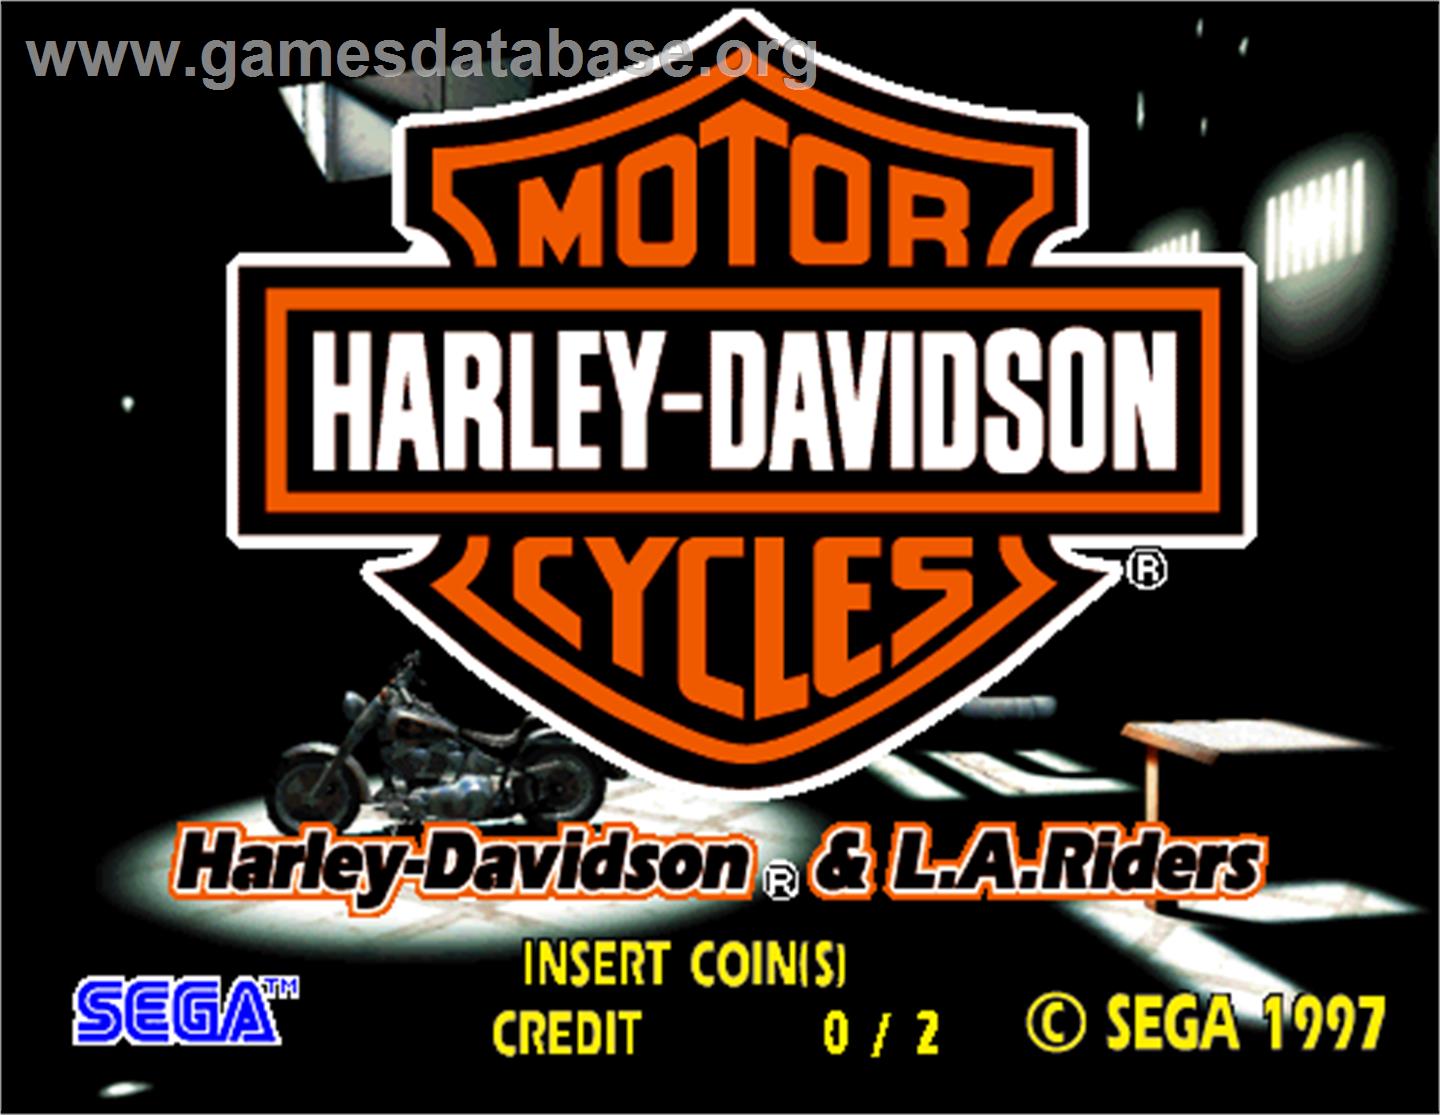 Harley-Davidson and L.A. Riders - Arcade - Artwork - Title Screen